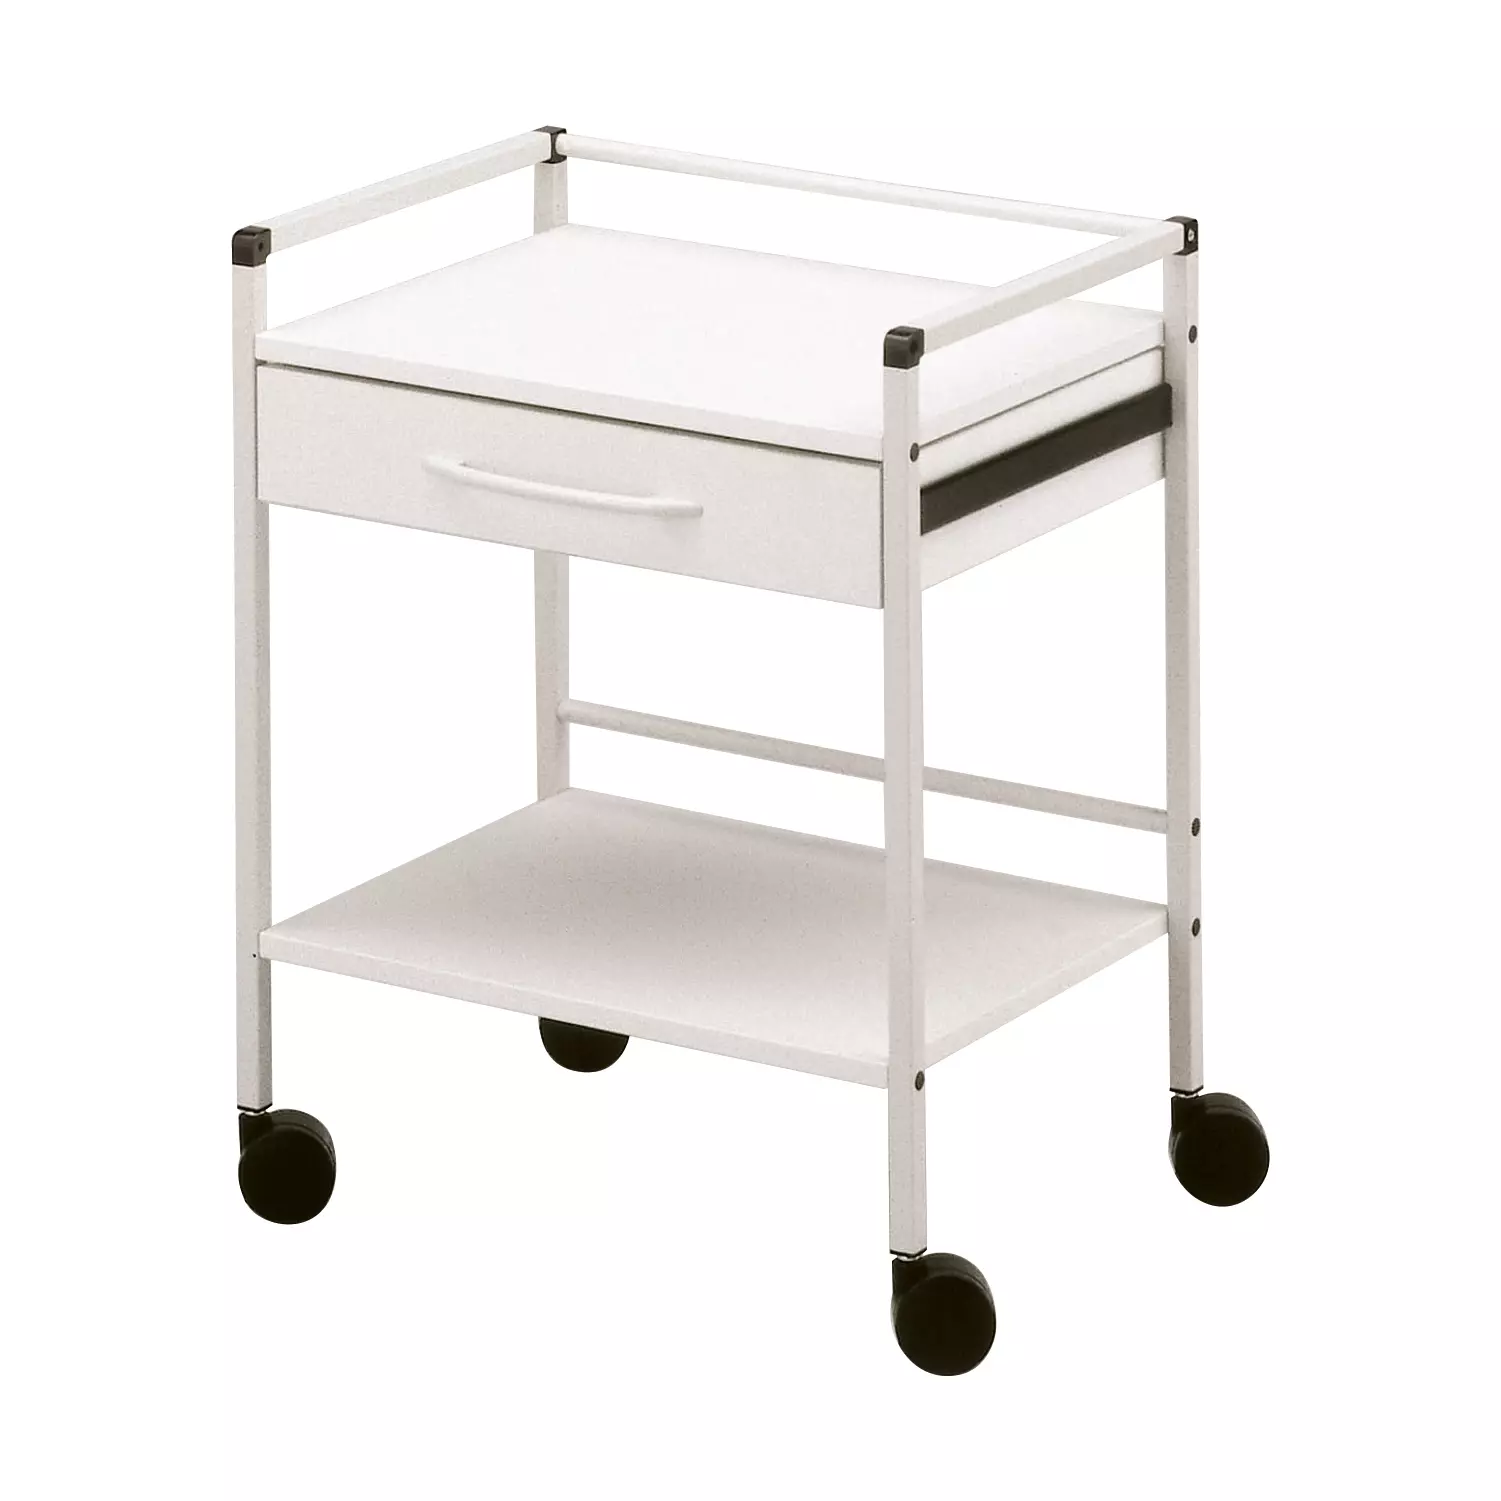 Universal table with drawer